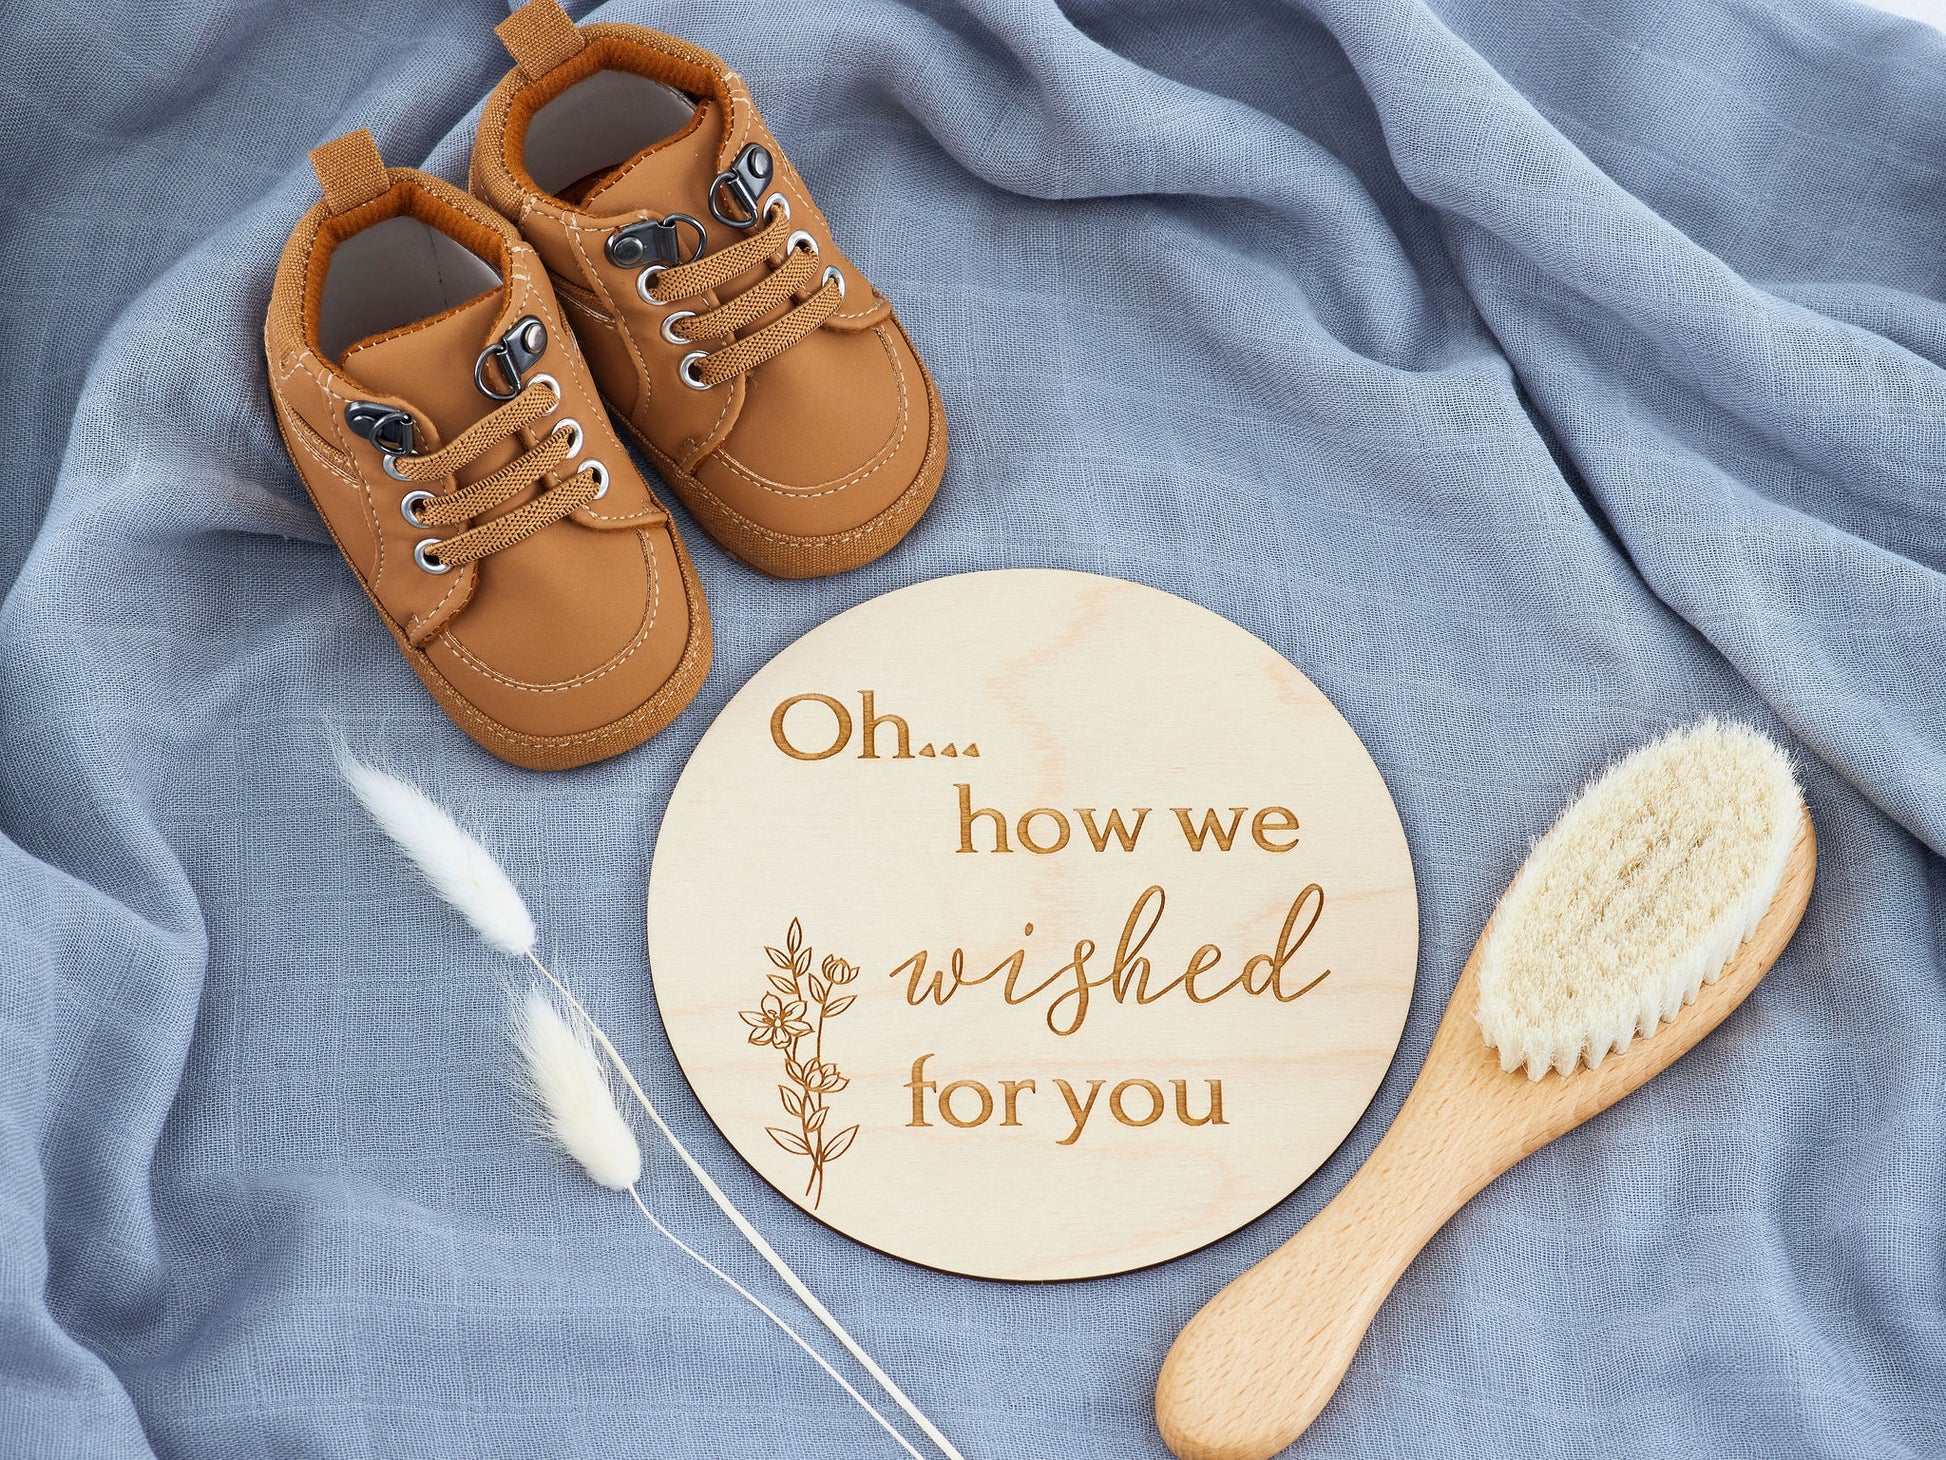 Oh how we wished for you - Pregnancy Plaque  Miss Ali's 15 CM Wished 